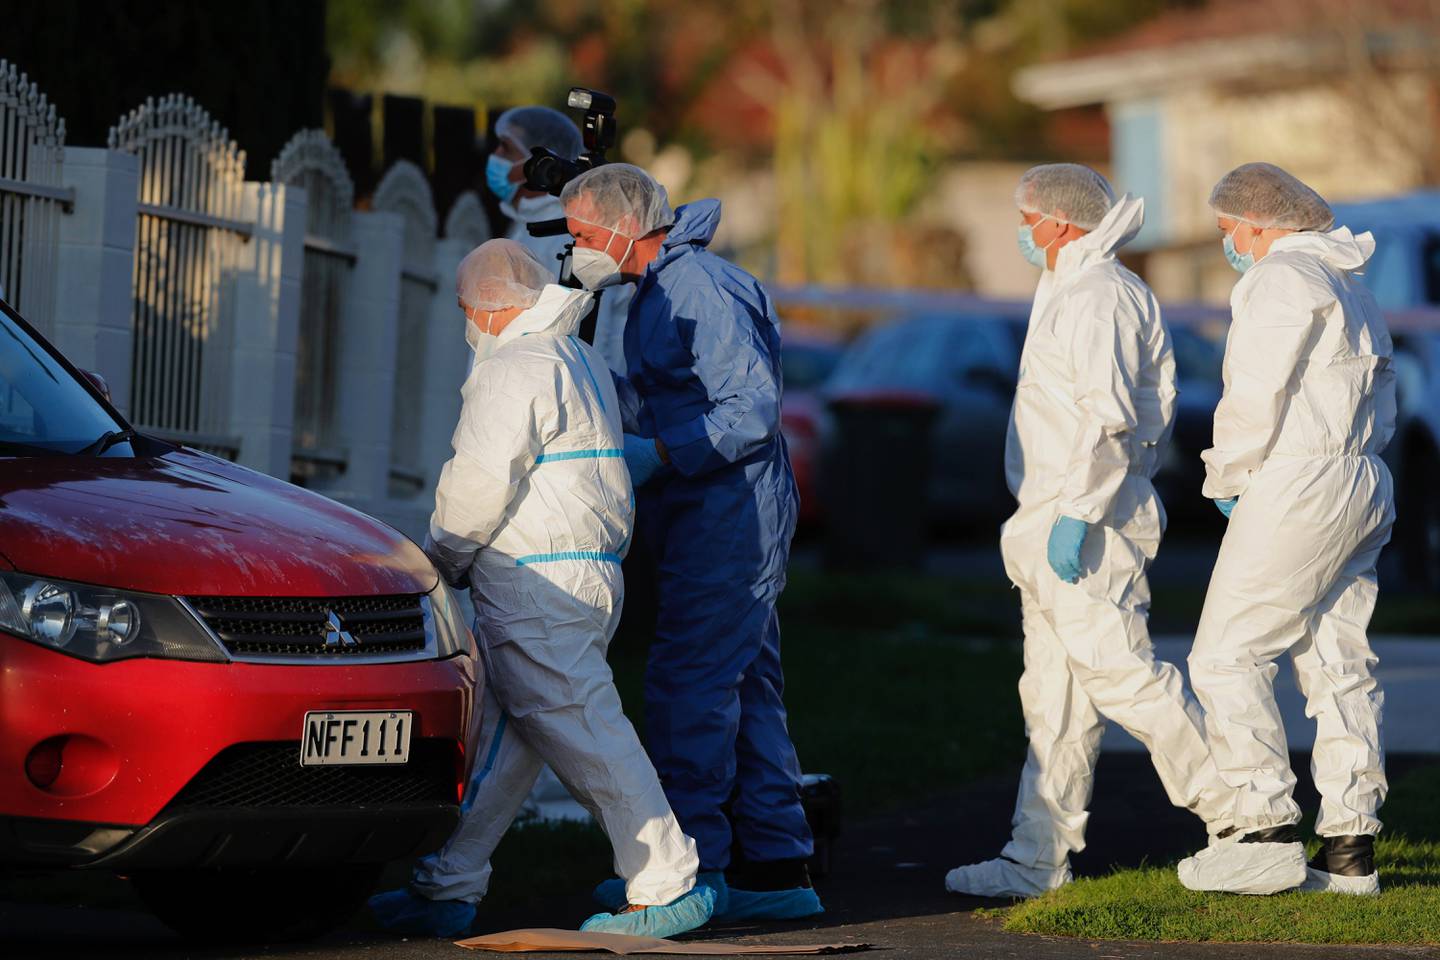 New Zealand police investigators work at a scene in Auckland on August 11 after bodies were discovered in suitcases. AP